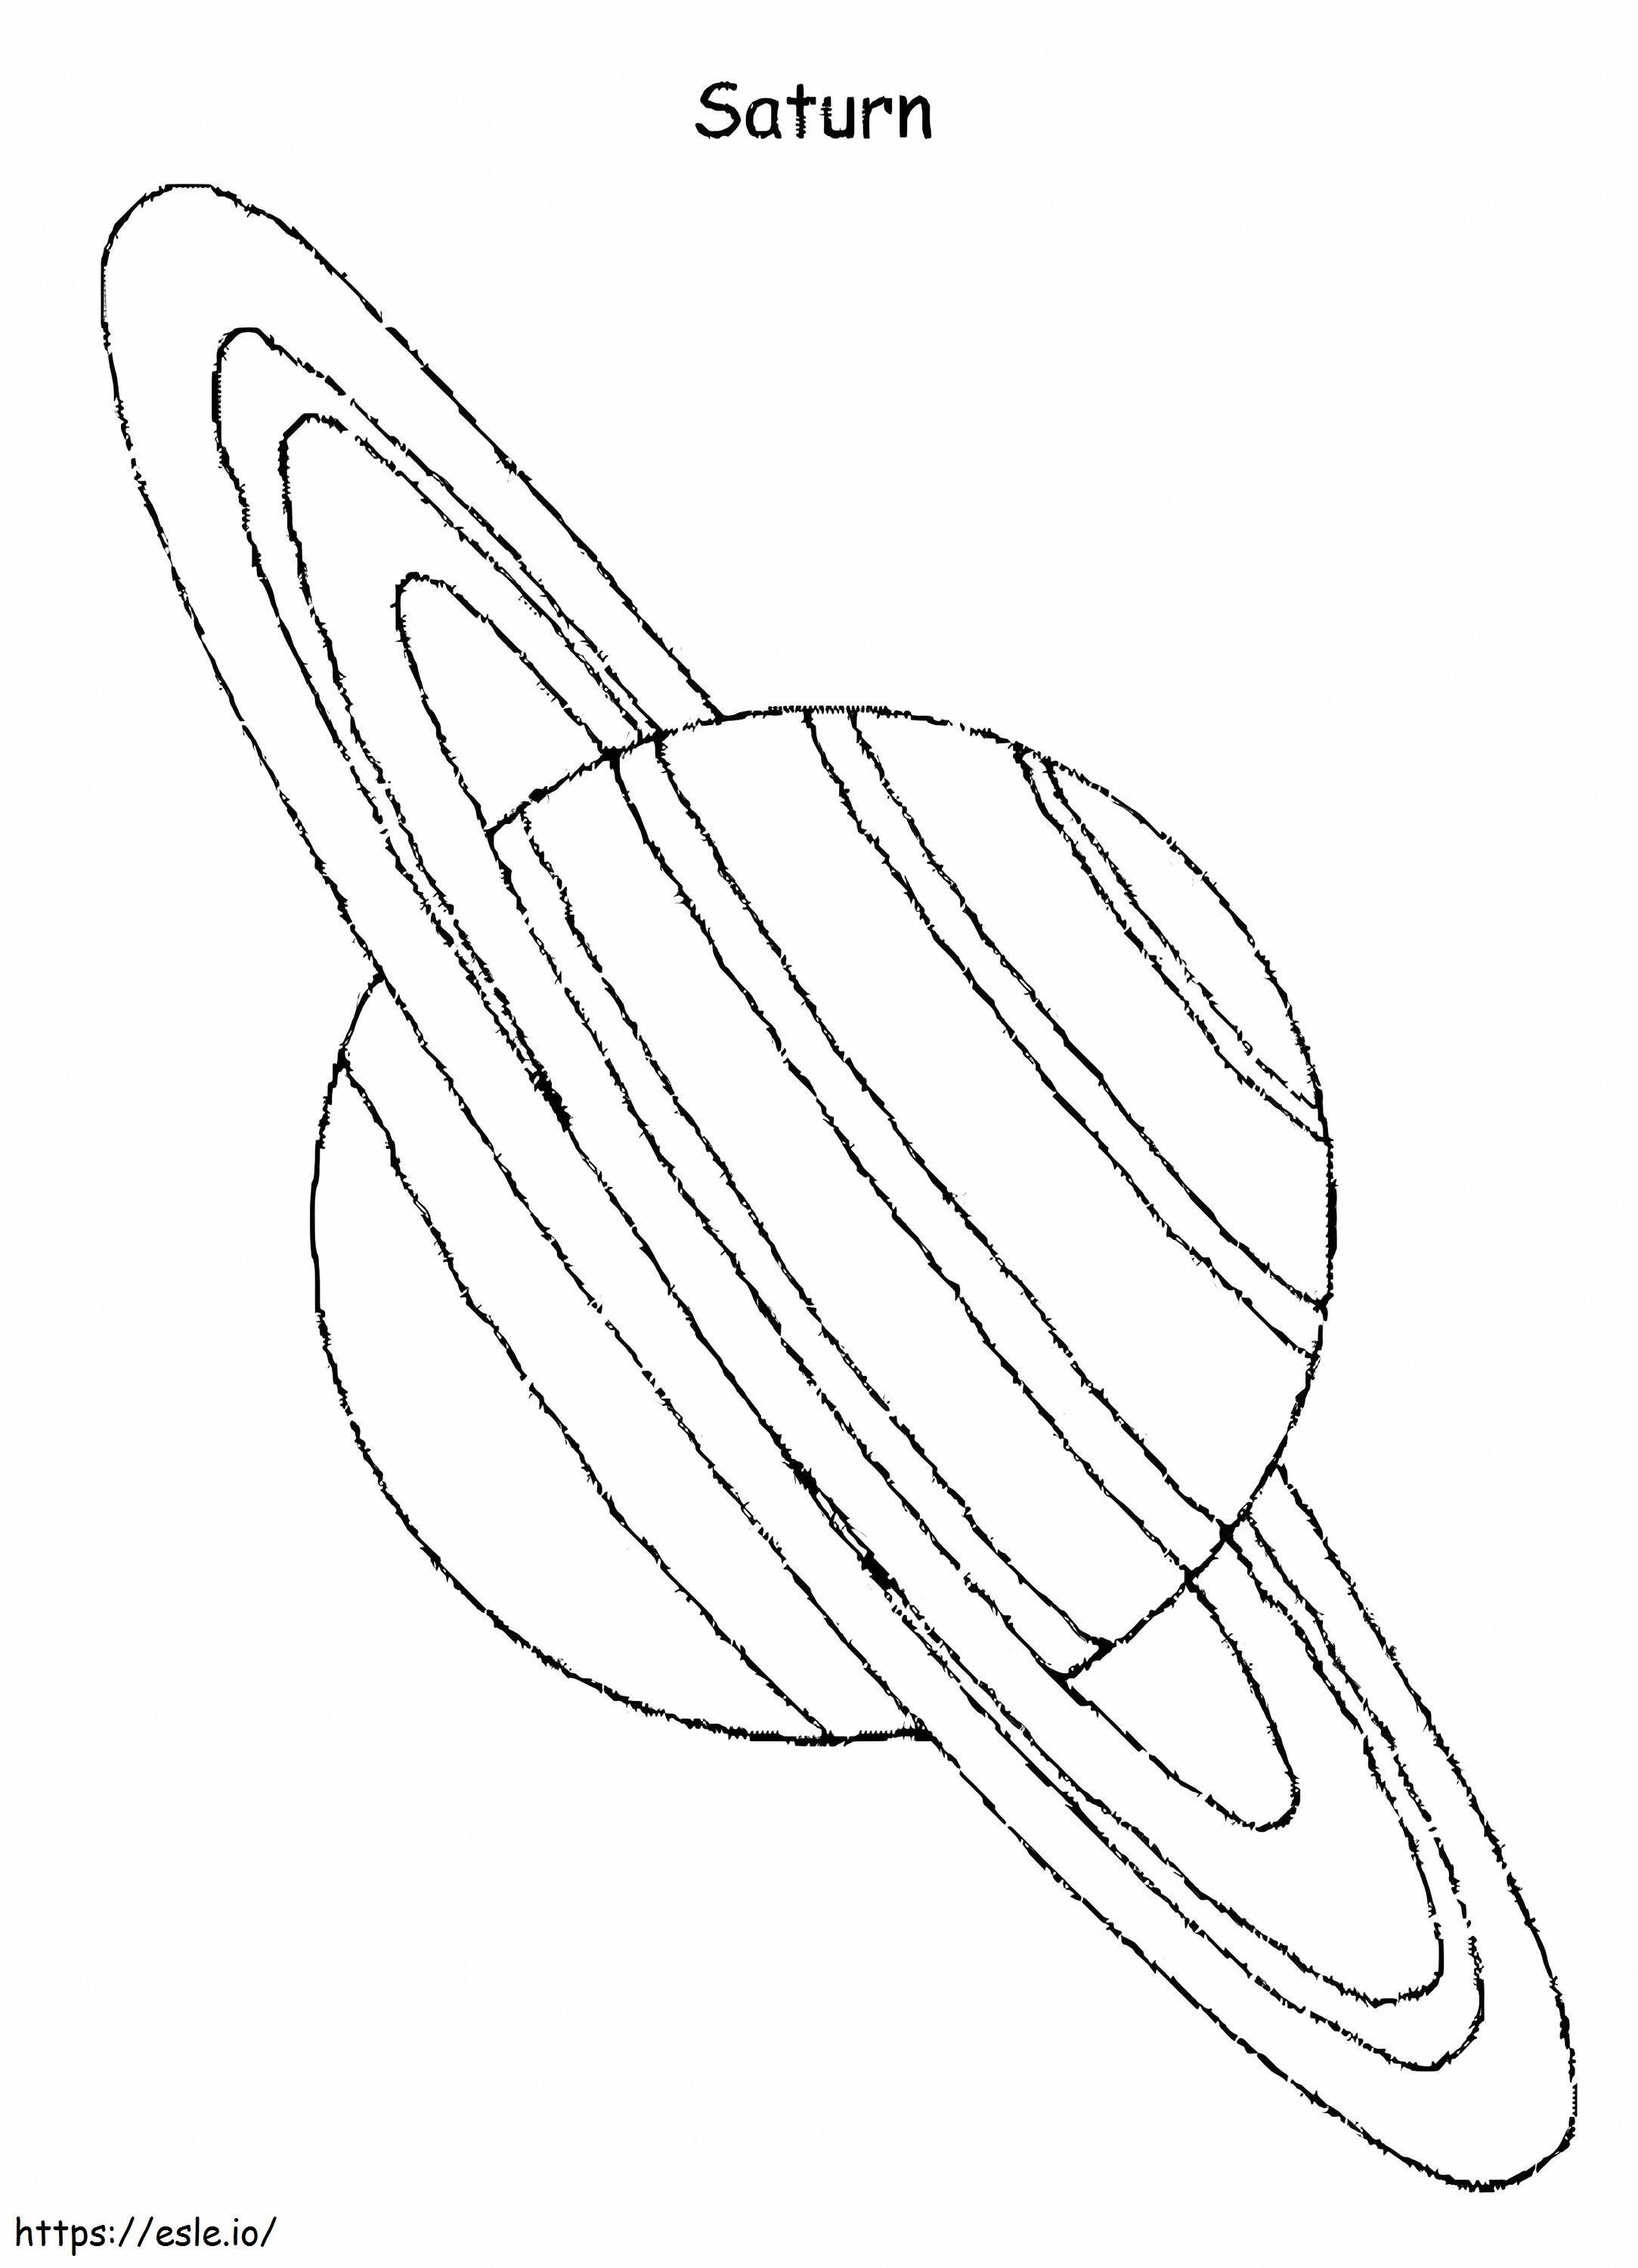 Planet Saturn 1 coloring page